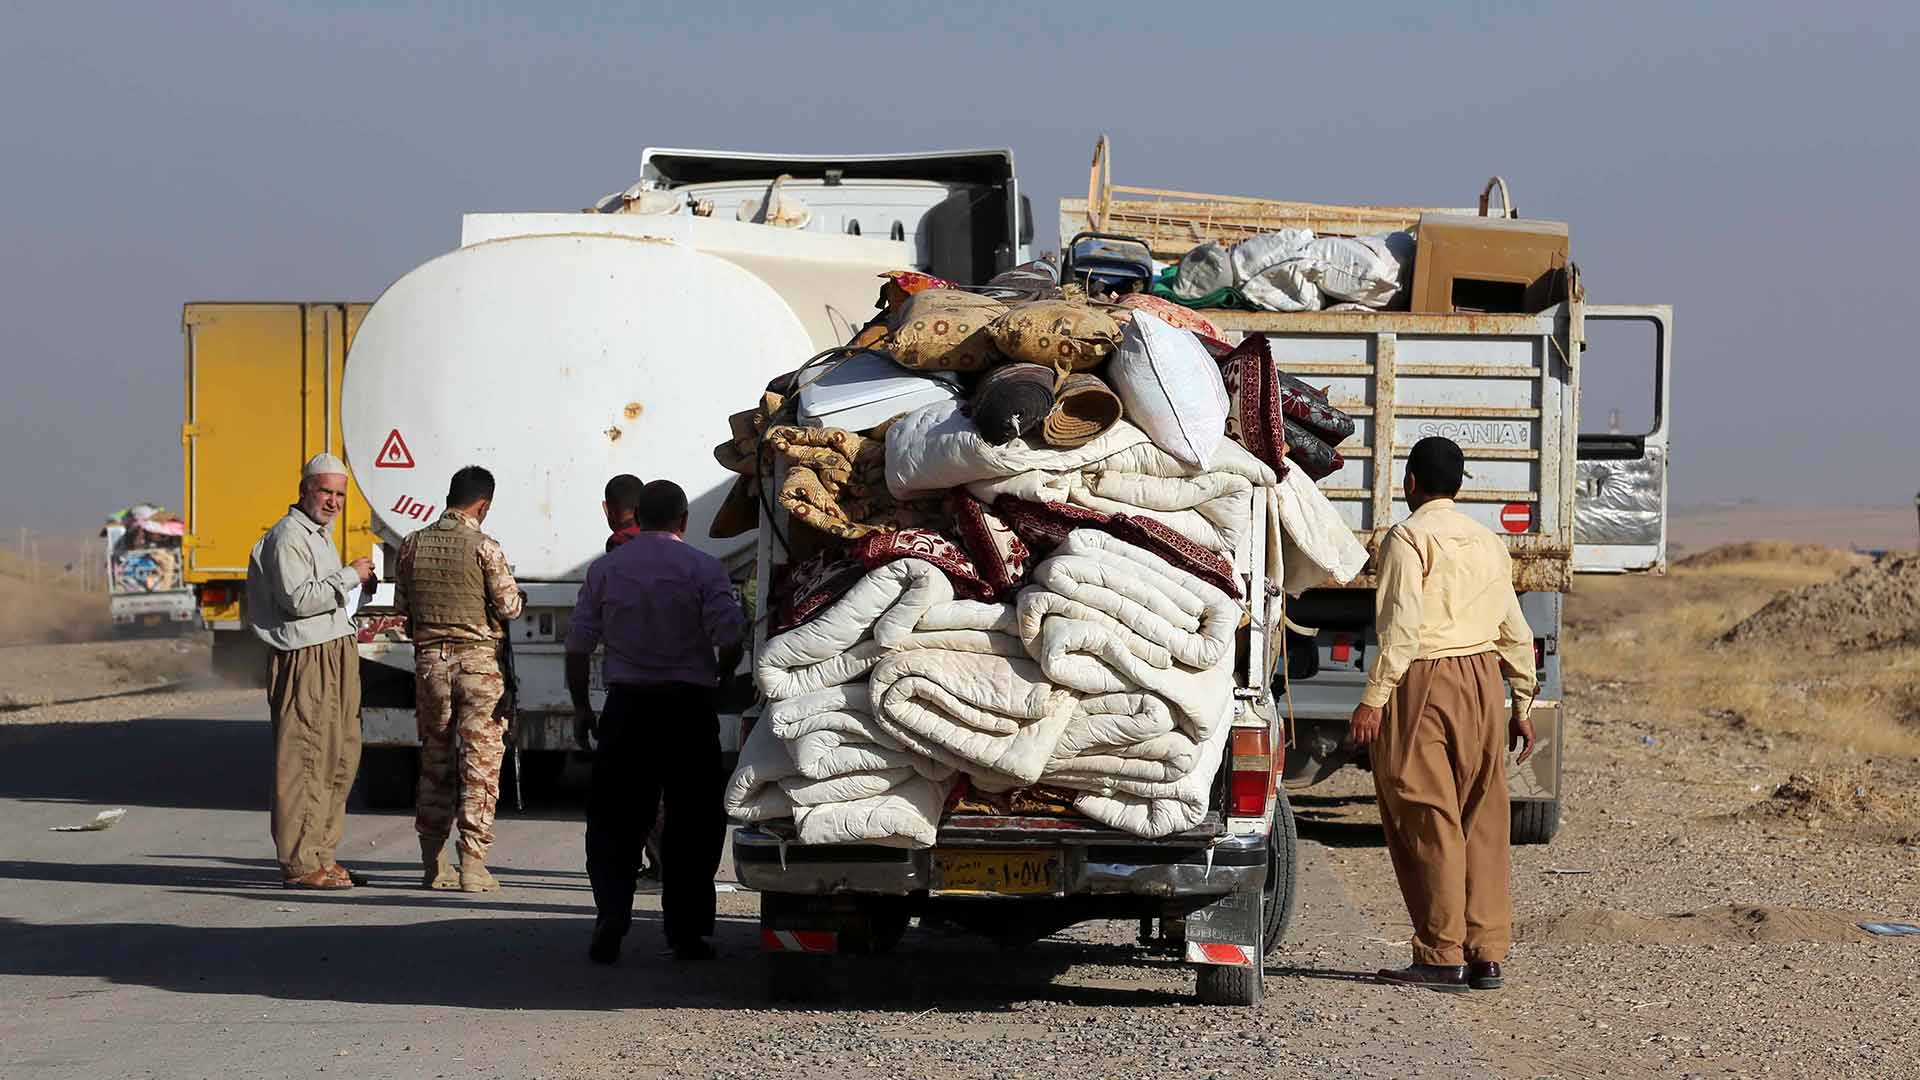 Iraqi displaced people, whose villages was liberated recently, return with their furniture and belongings, outside Mosul, Iraq, Thursday, Oct. 20, 2016. In a significant escalation of the battle for Mosul, elite Iraqi special forces joined the fight Thursday, unleashing a pre-dawn assault on an Islamic State-held town east of the besieged city. (AP Photo/ Khalid Mohammed)